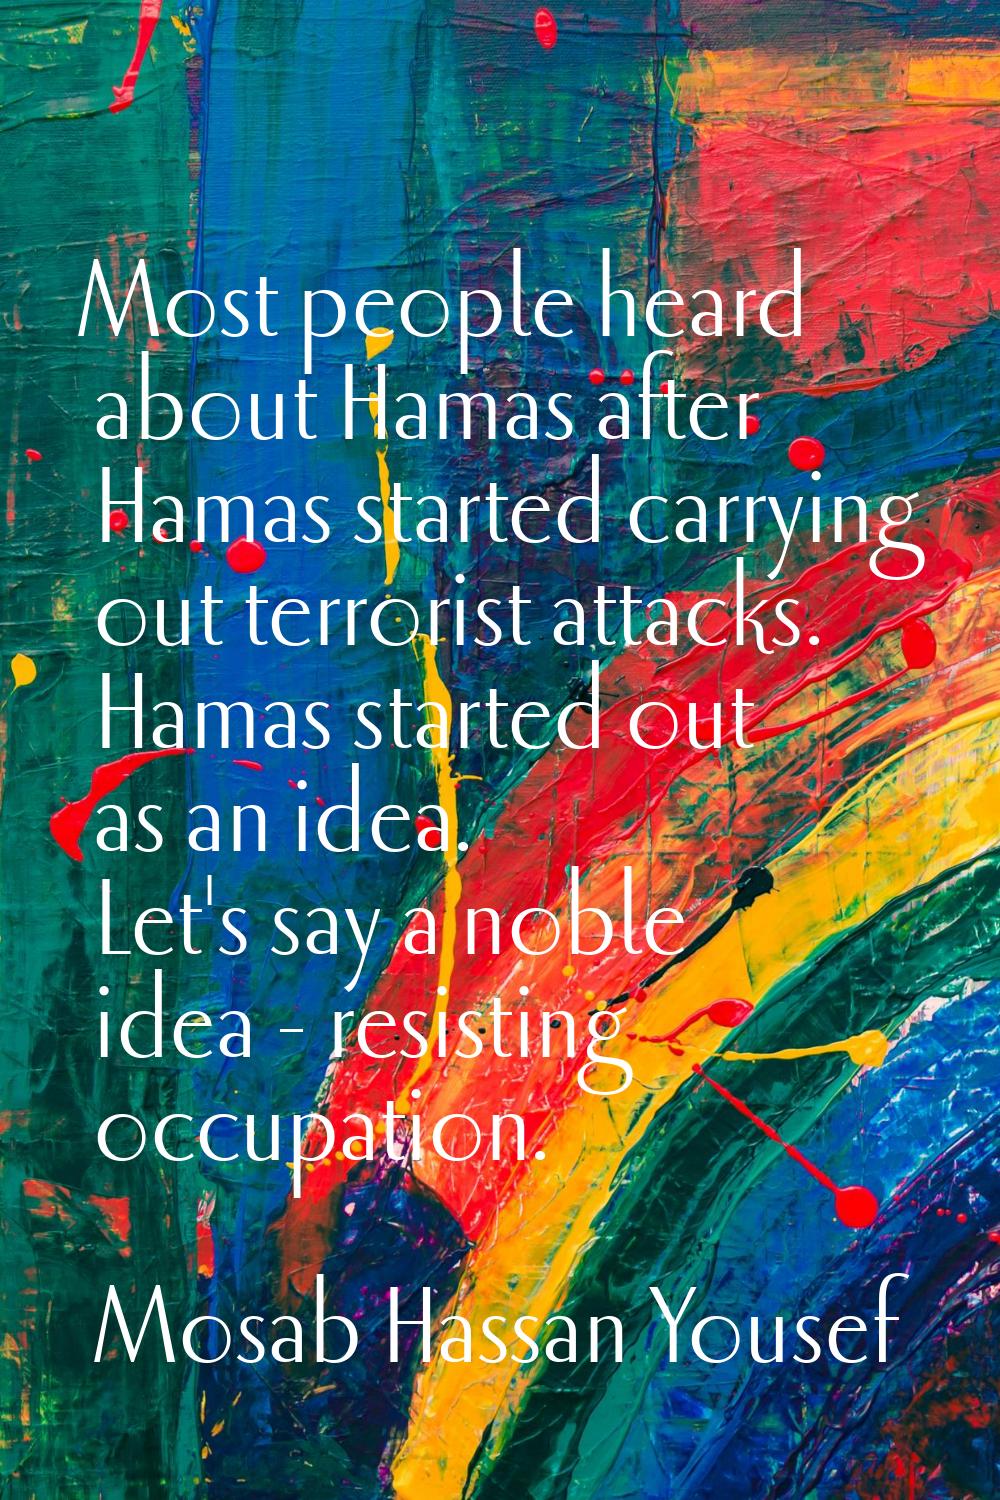 Most people heard about Hamas after Hamas started carrying out terrorist attacks. Hamas started out